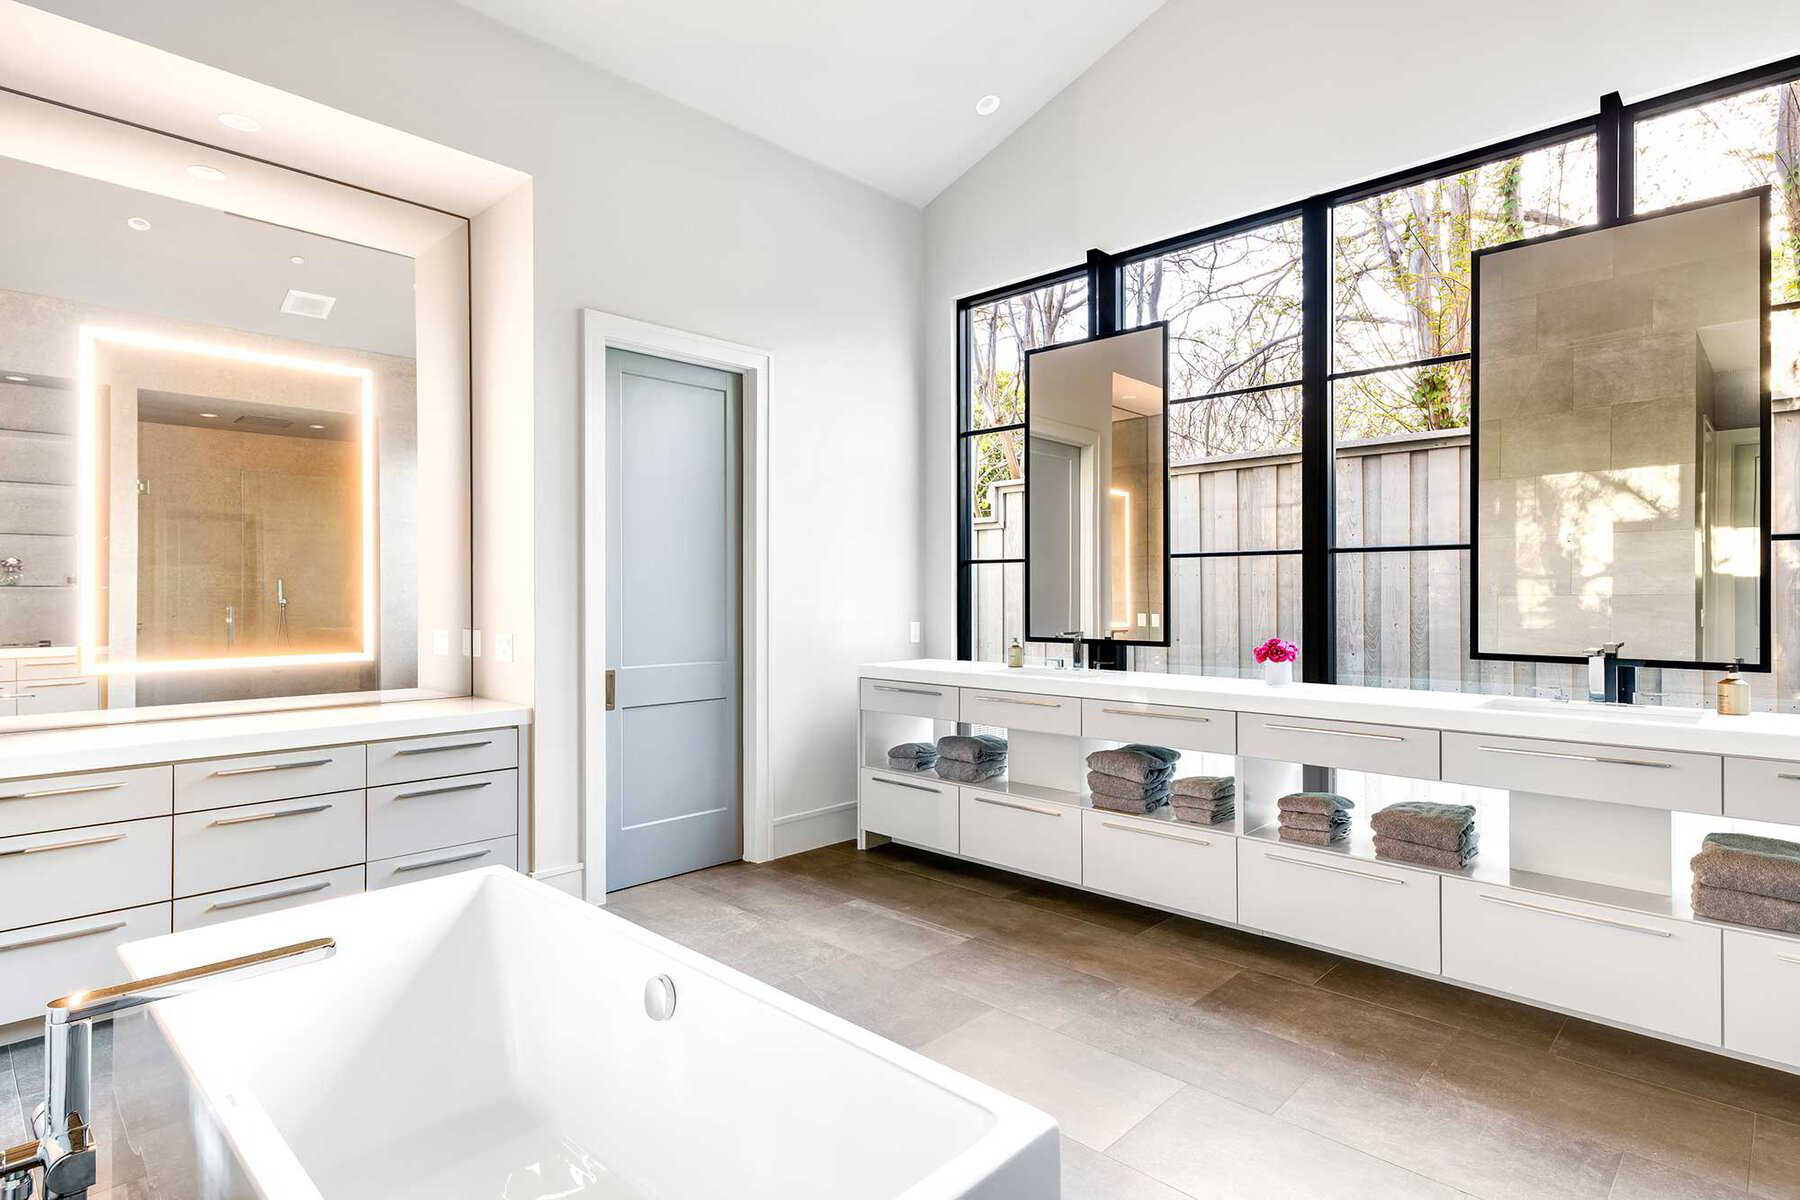 Master Bathroom Ideas: 21 Designs To Help You Relax And Soak In Style